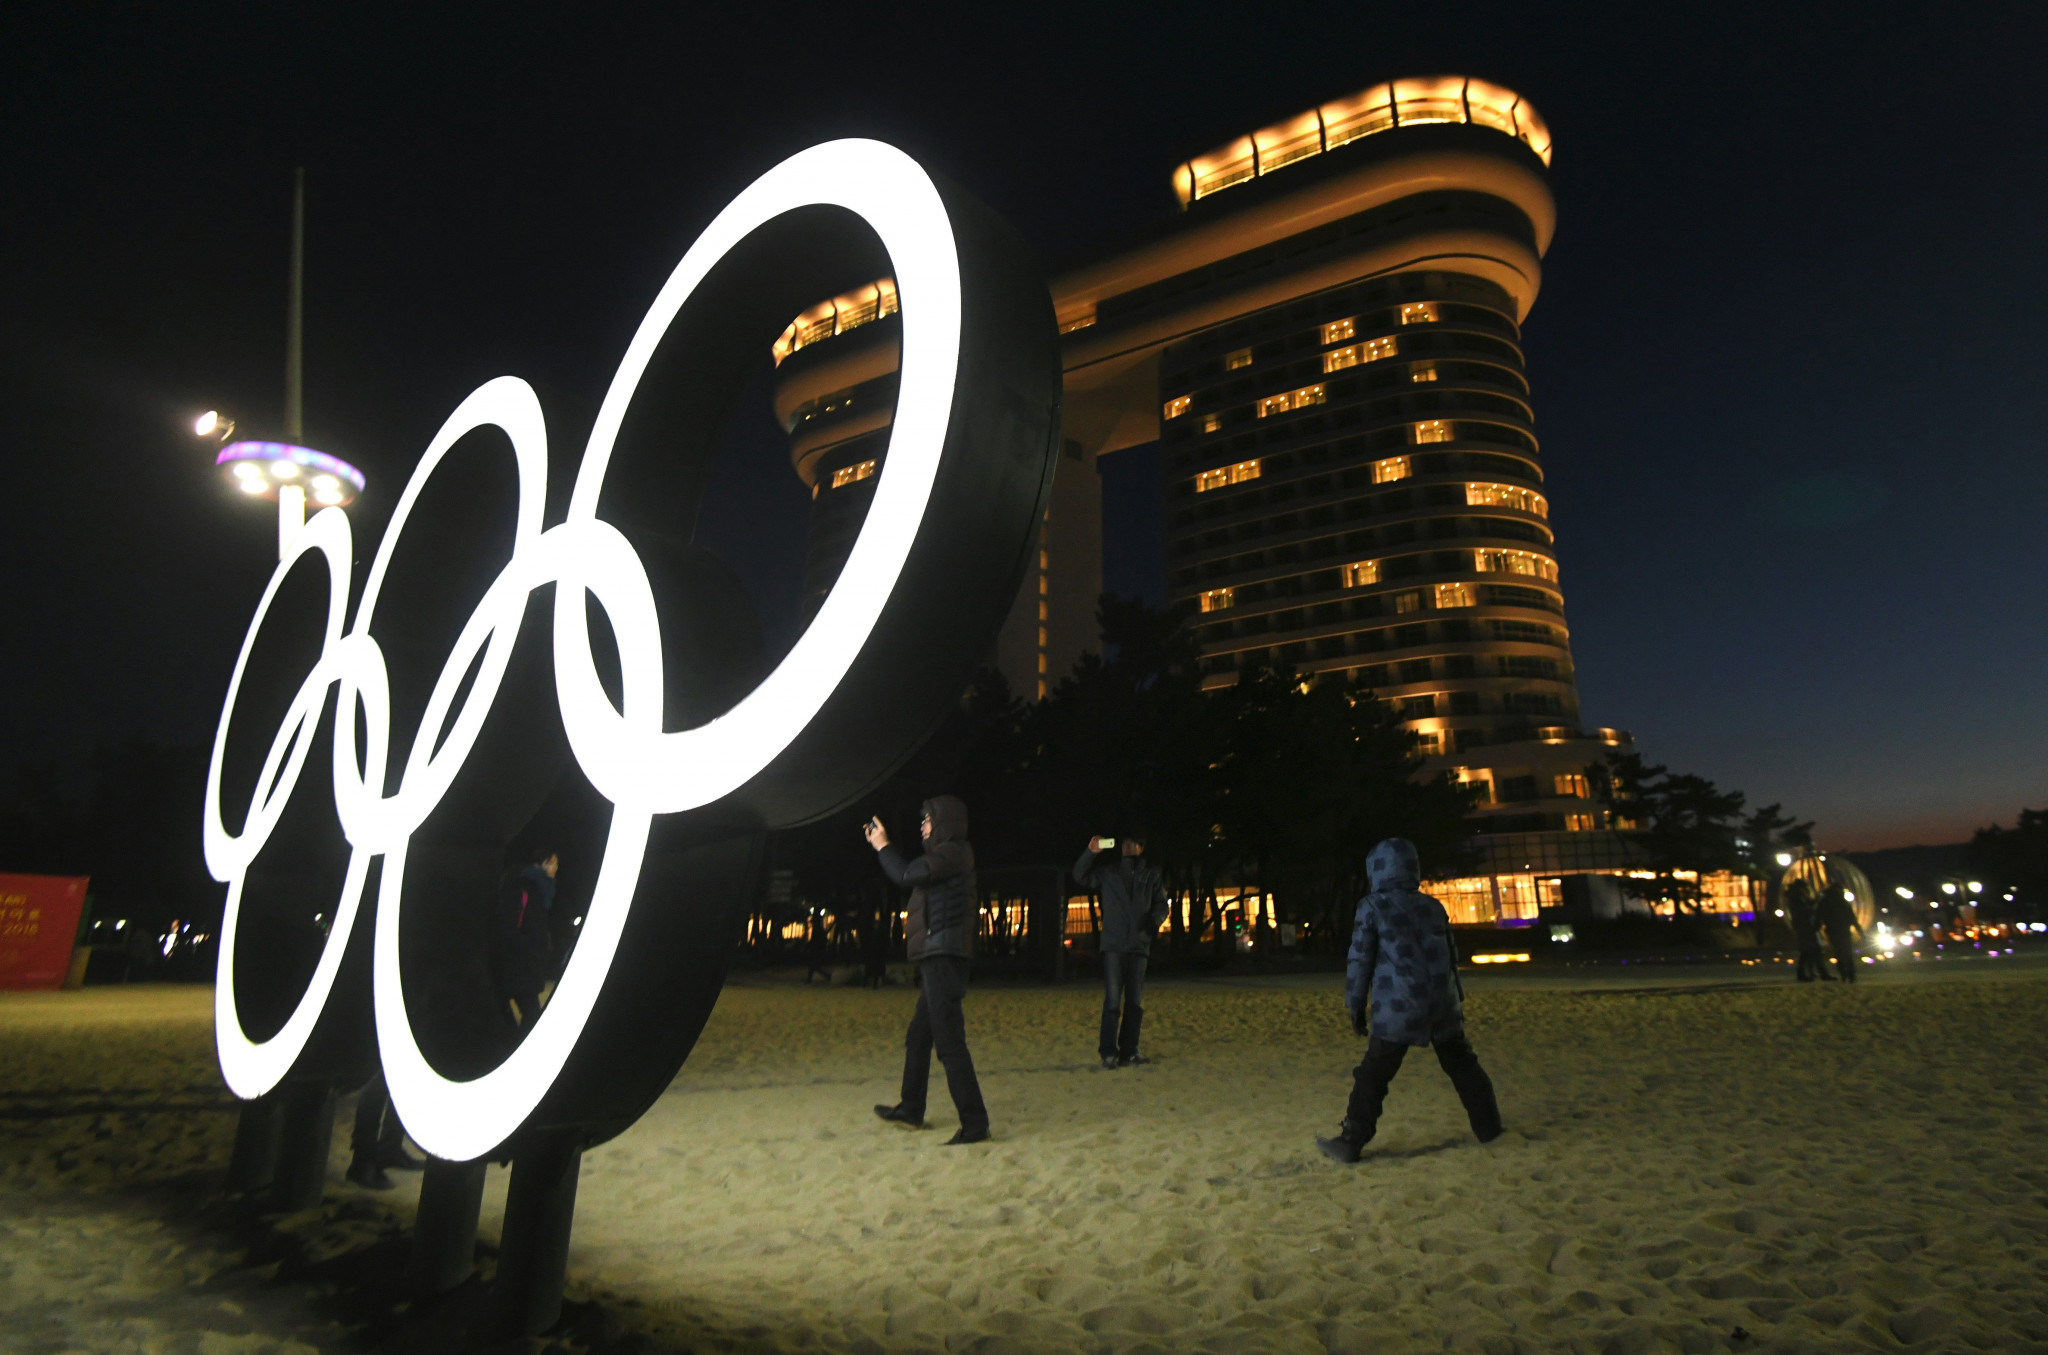 The Olympic Rings are illuminated on Gyeongpo beach in Gangneung ©Getty Images